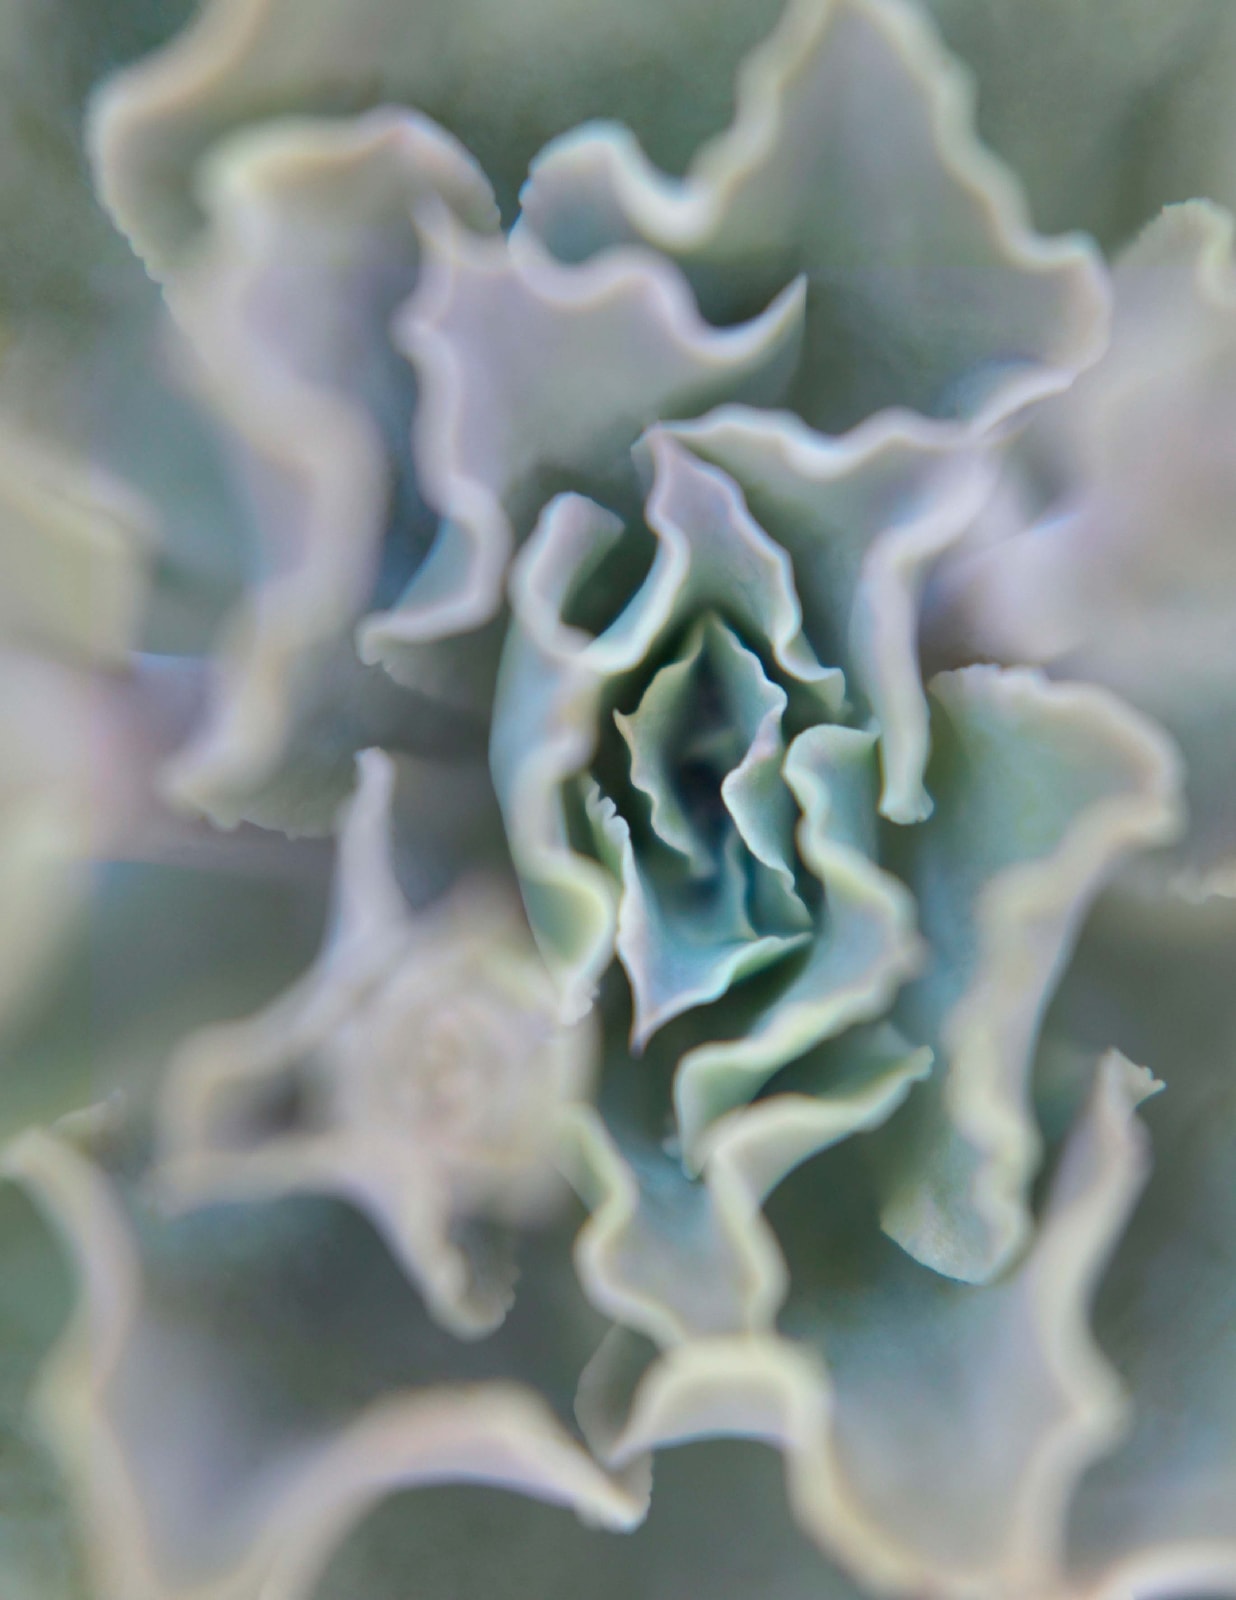 Succulent in the style of Georgia O'Keeffe, by Mona Kuhn